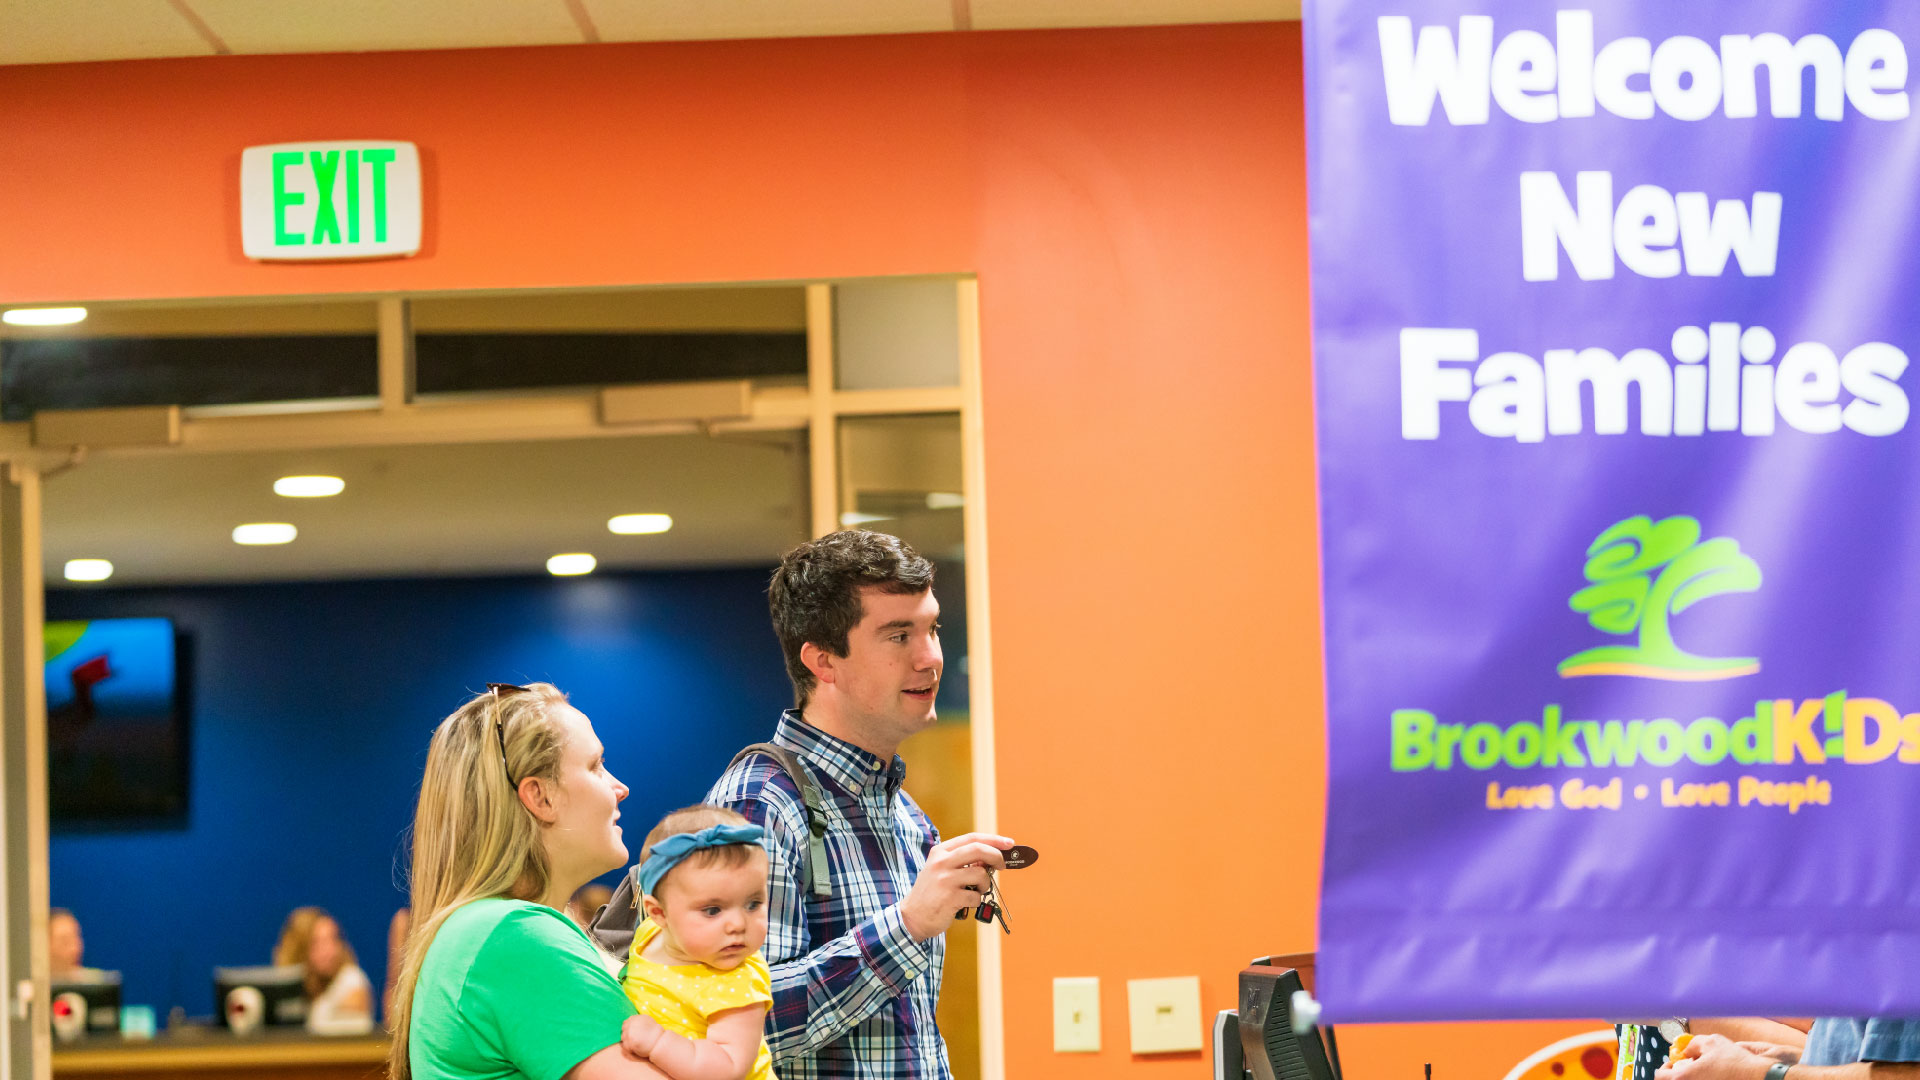 A family with a baby stands in front of the Welcome New Families banner at Brookwood Church